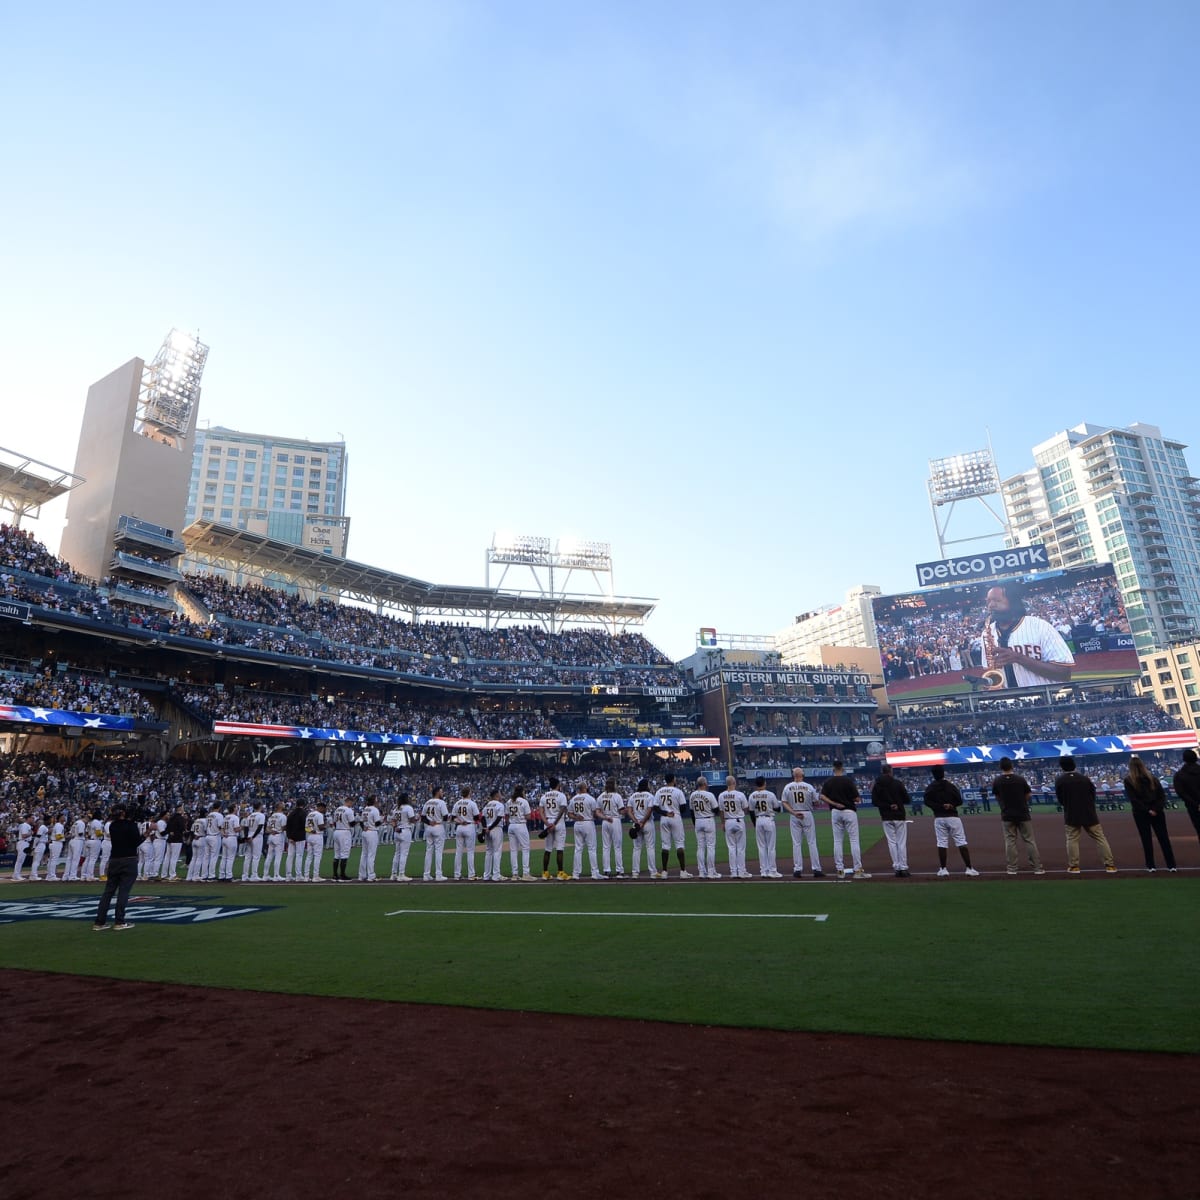 What to expect for Padres Reopening Day at Petco Park